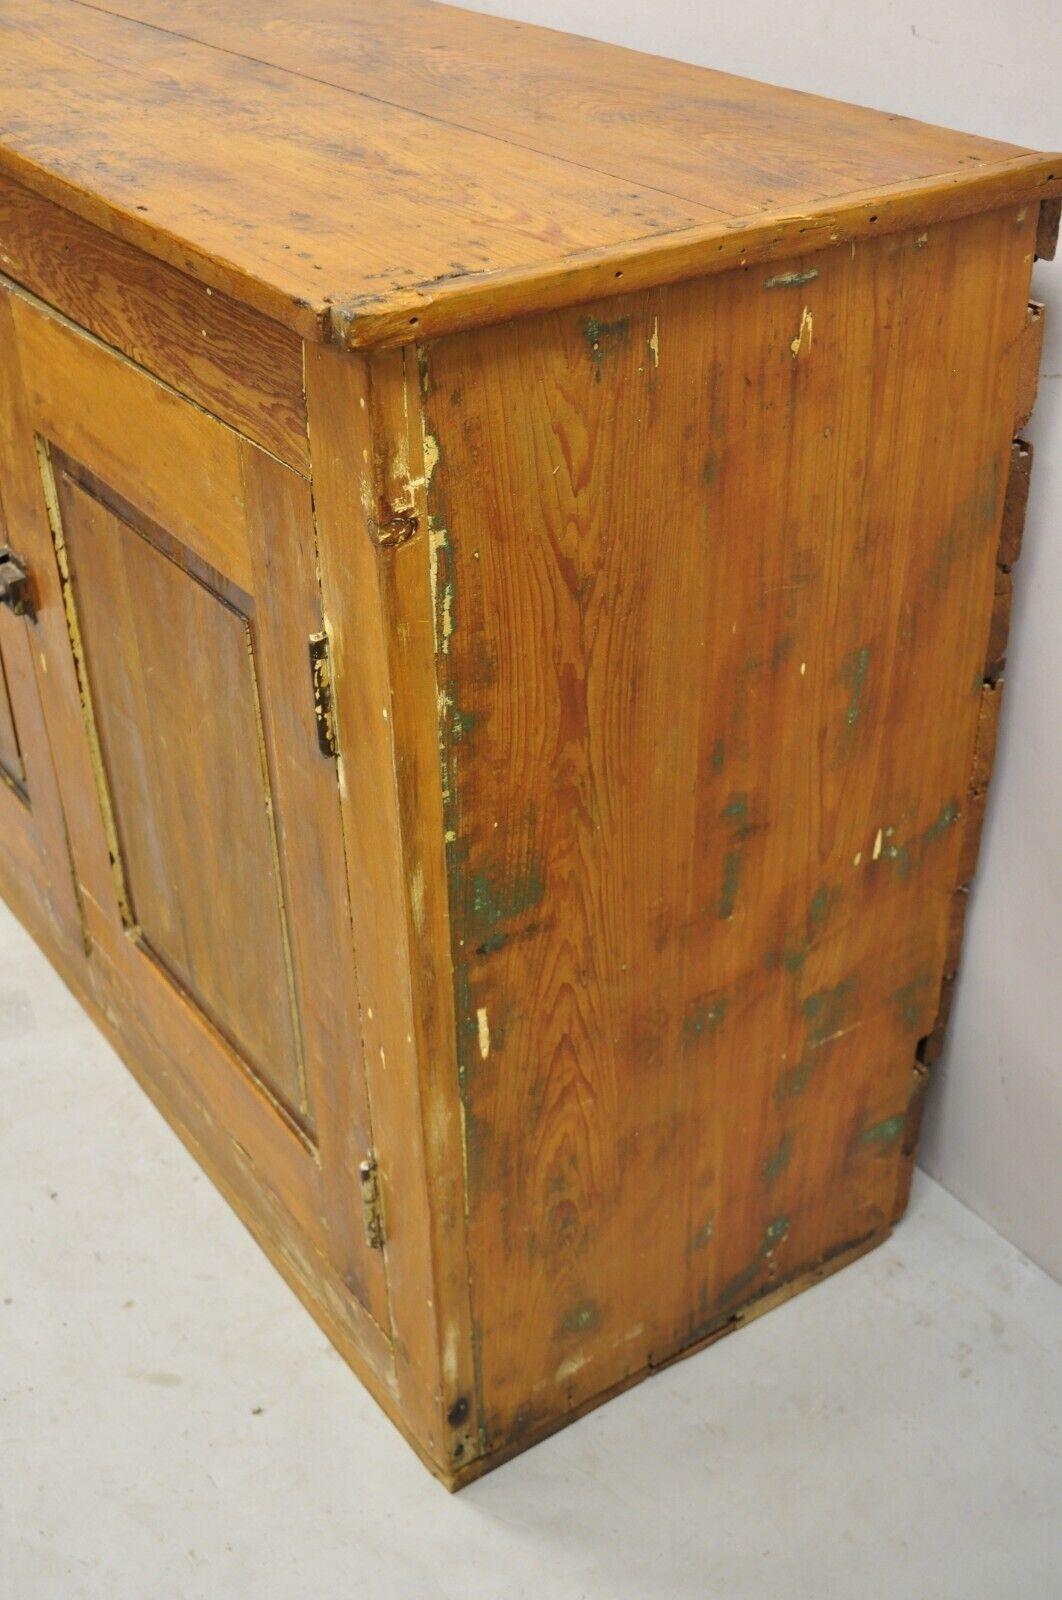 19th Century Antique American Primitive Country Pine Wood 2 Door Cupboard Hutch Cabinet For Sale